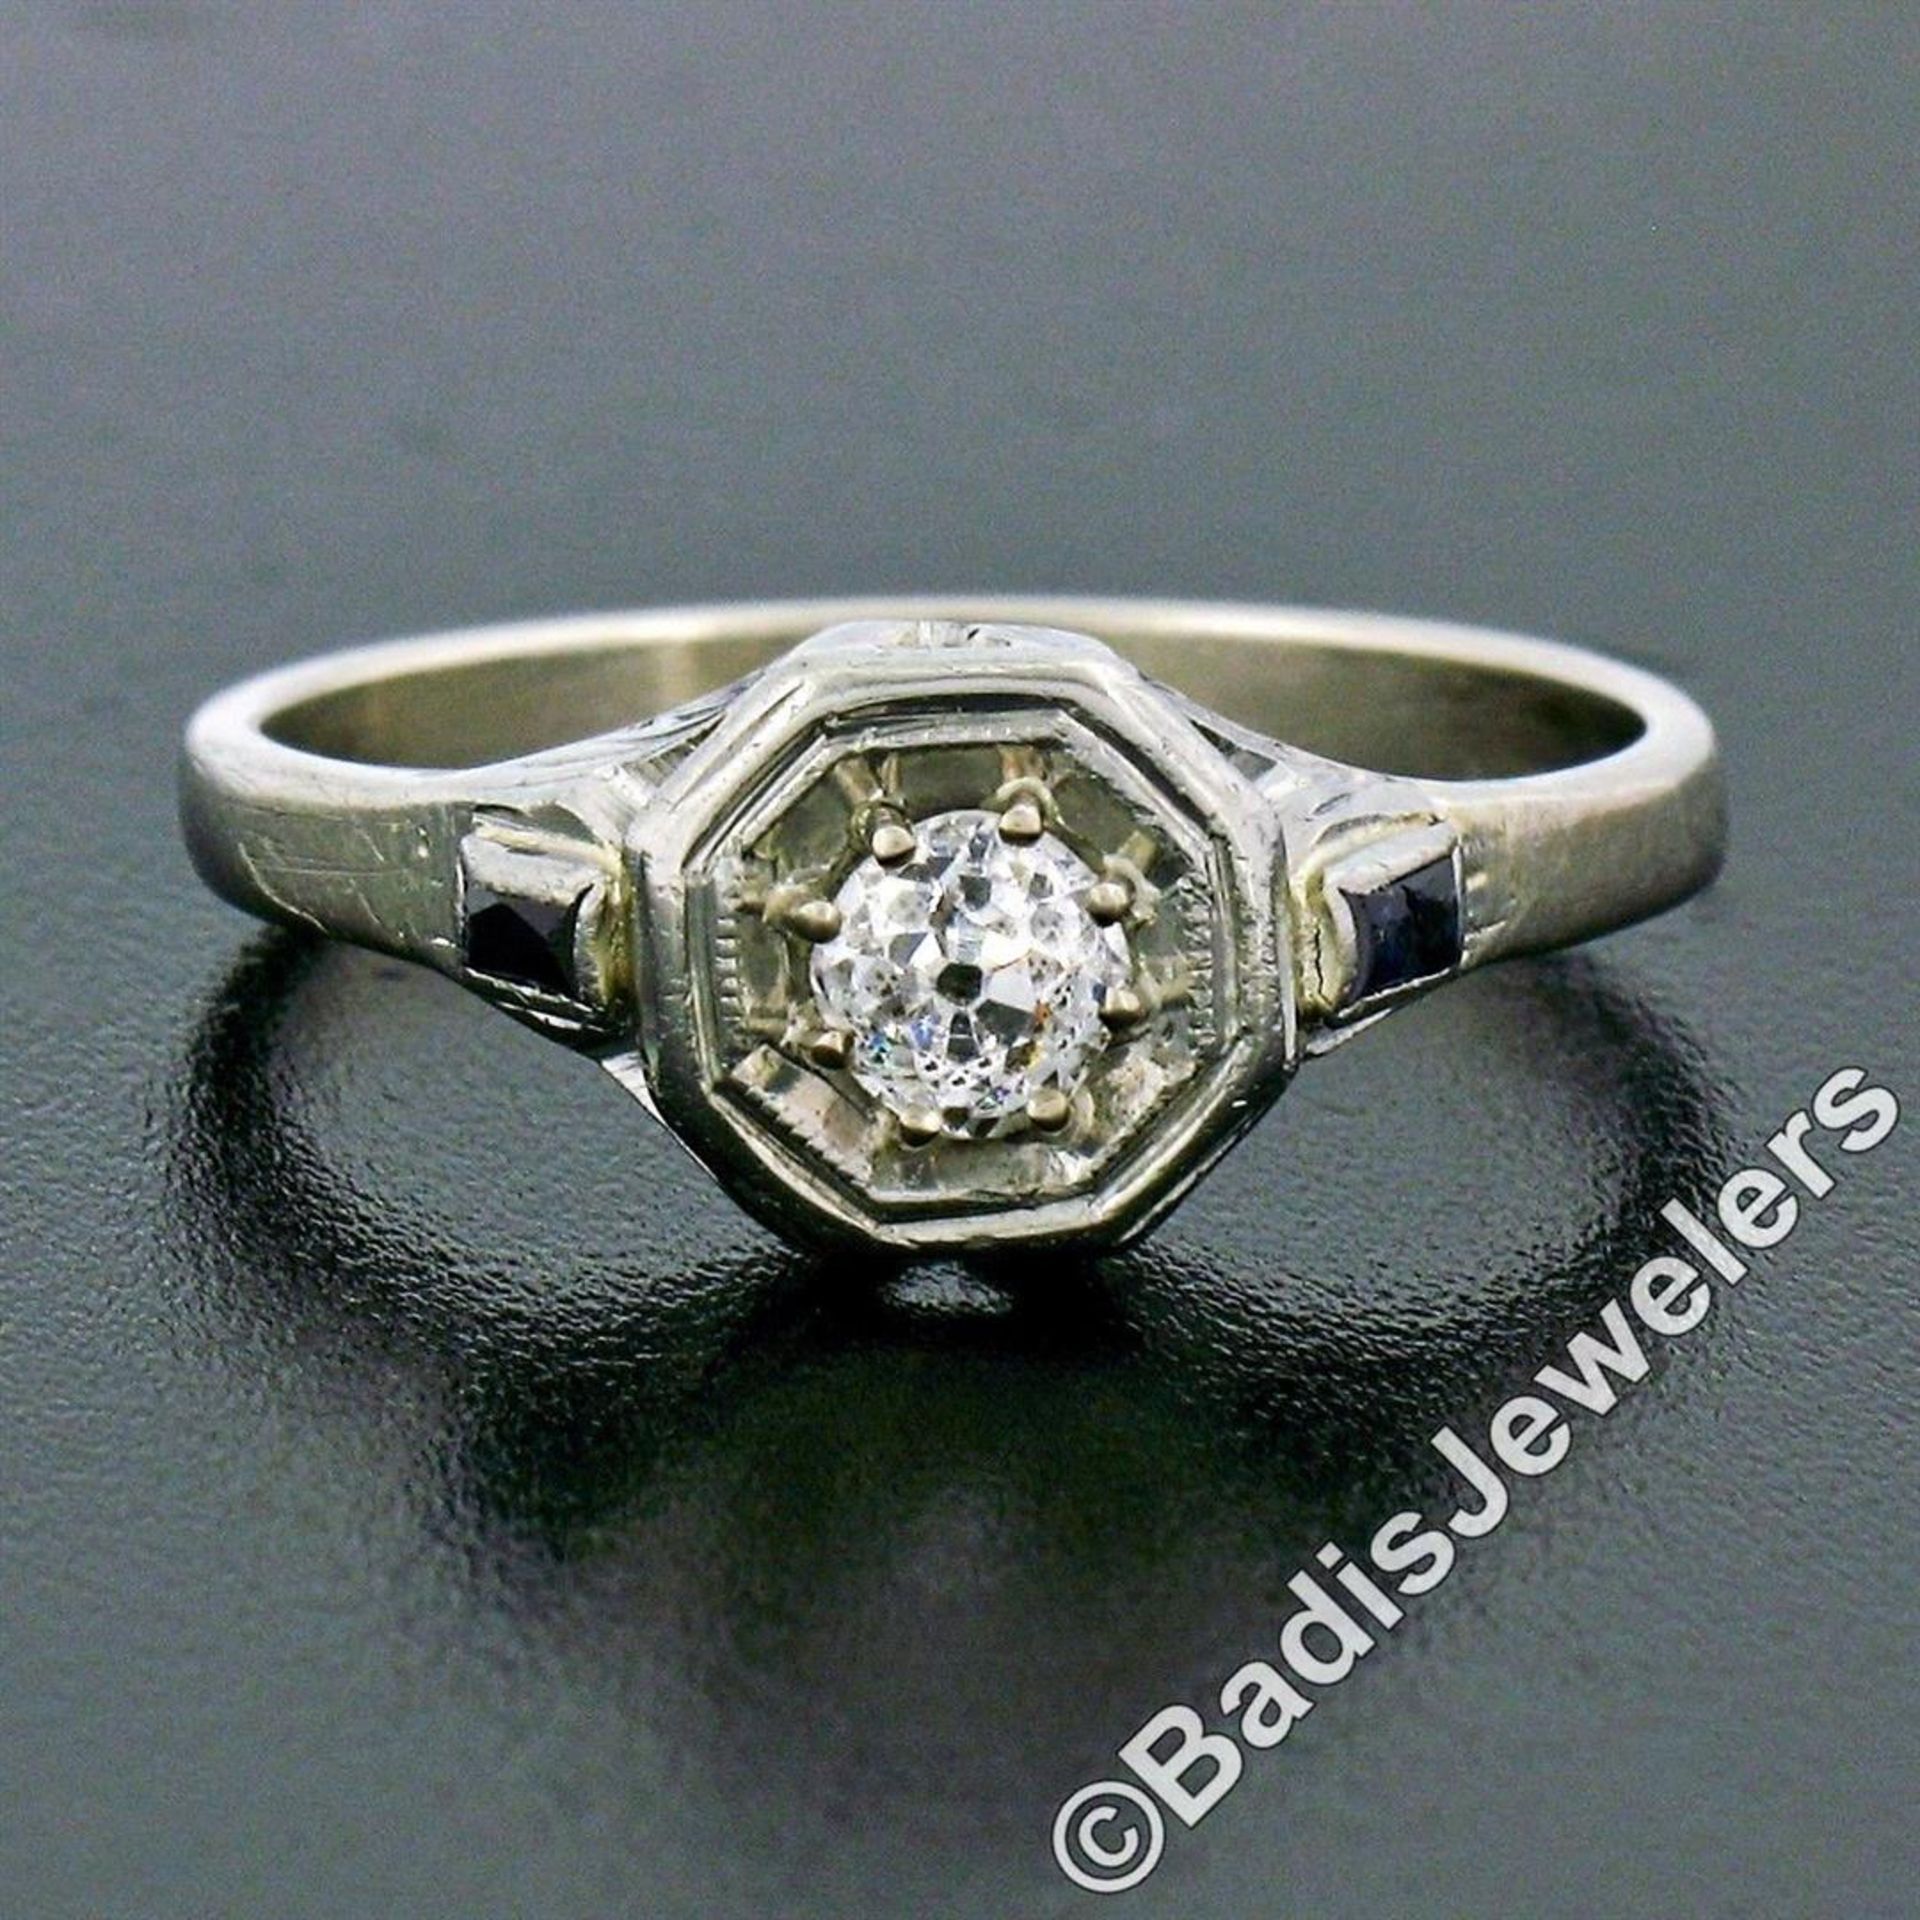 Art Deco 14kt White Gold 0.28 ctw Diamond Solitaire Engagement Ring - Image 2 of 7